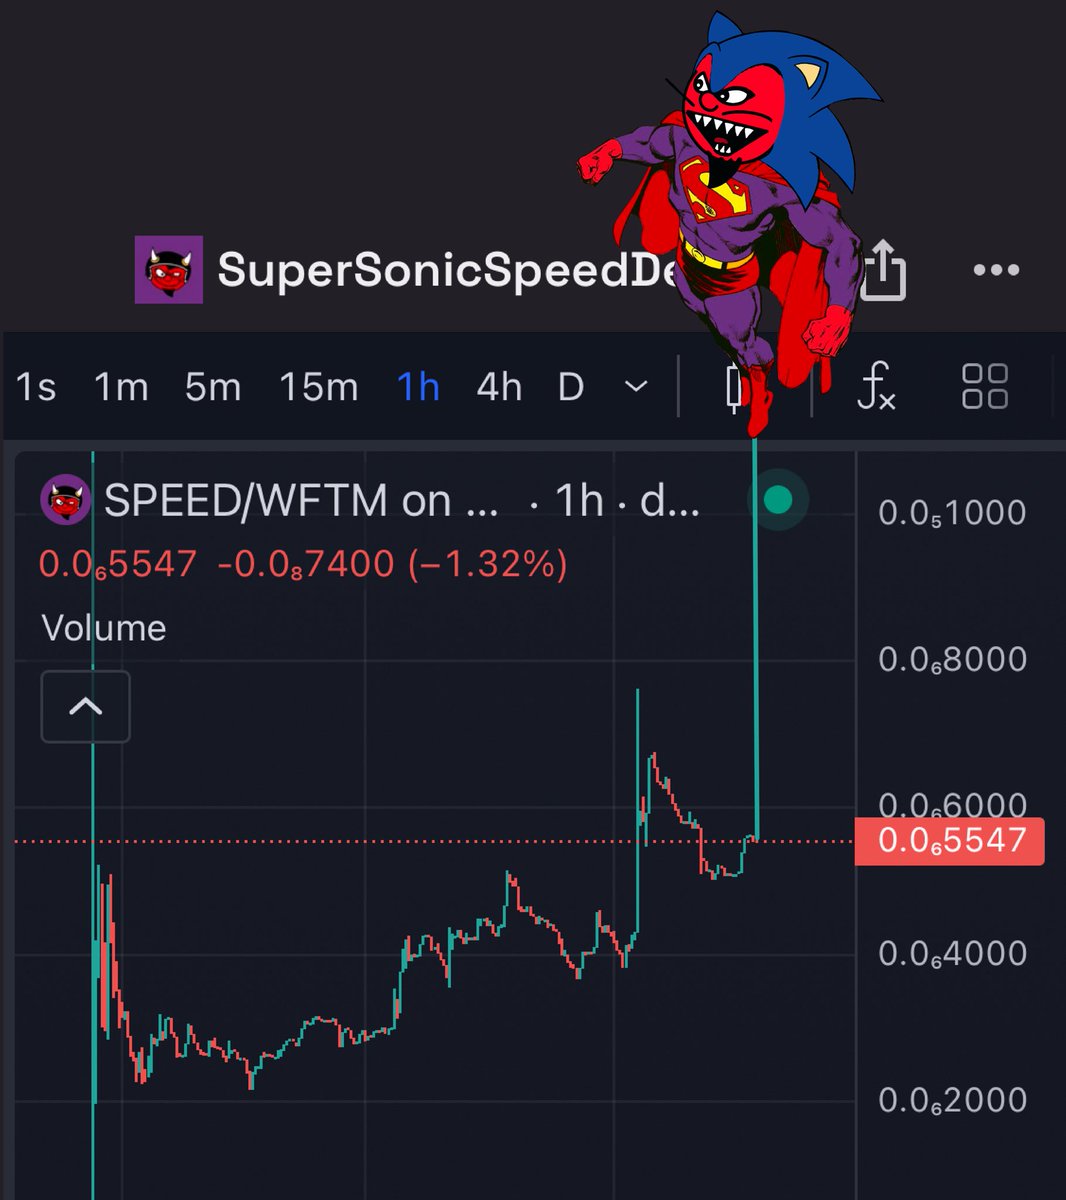 Only a little over 500 holders. Do you realize how early you are? The greatest chart in crypto history. The ticker is: $SPEED #SuperSonicSpeedDemon #needspeed